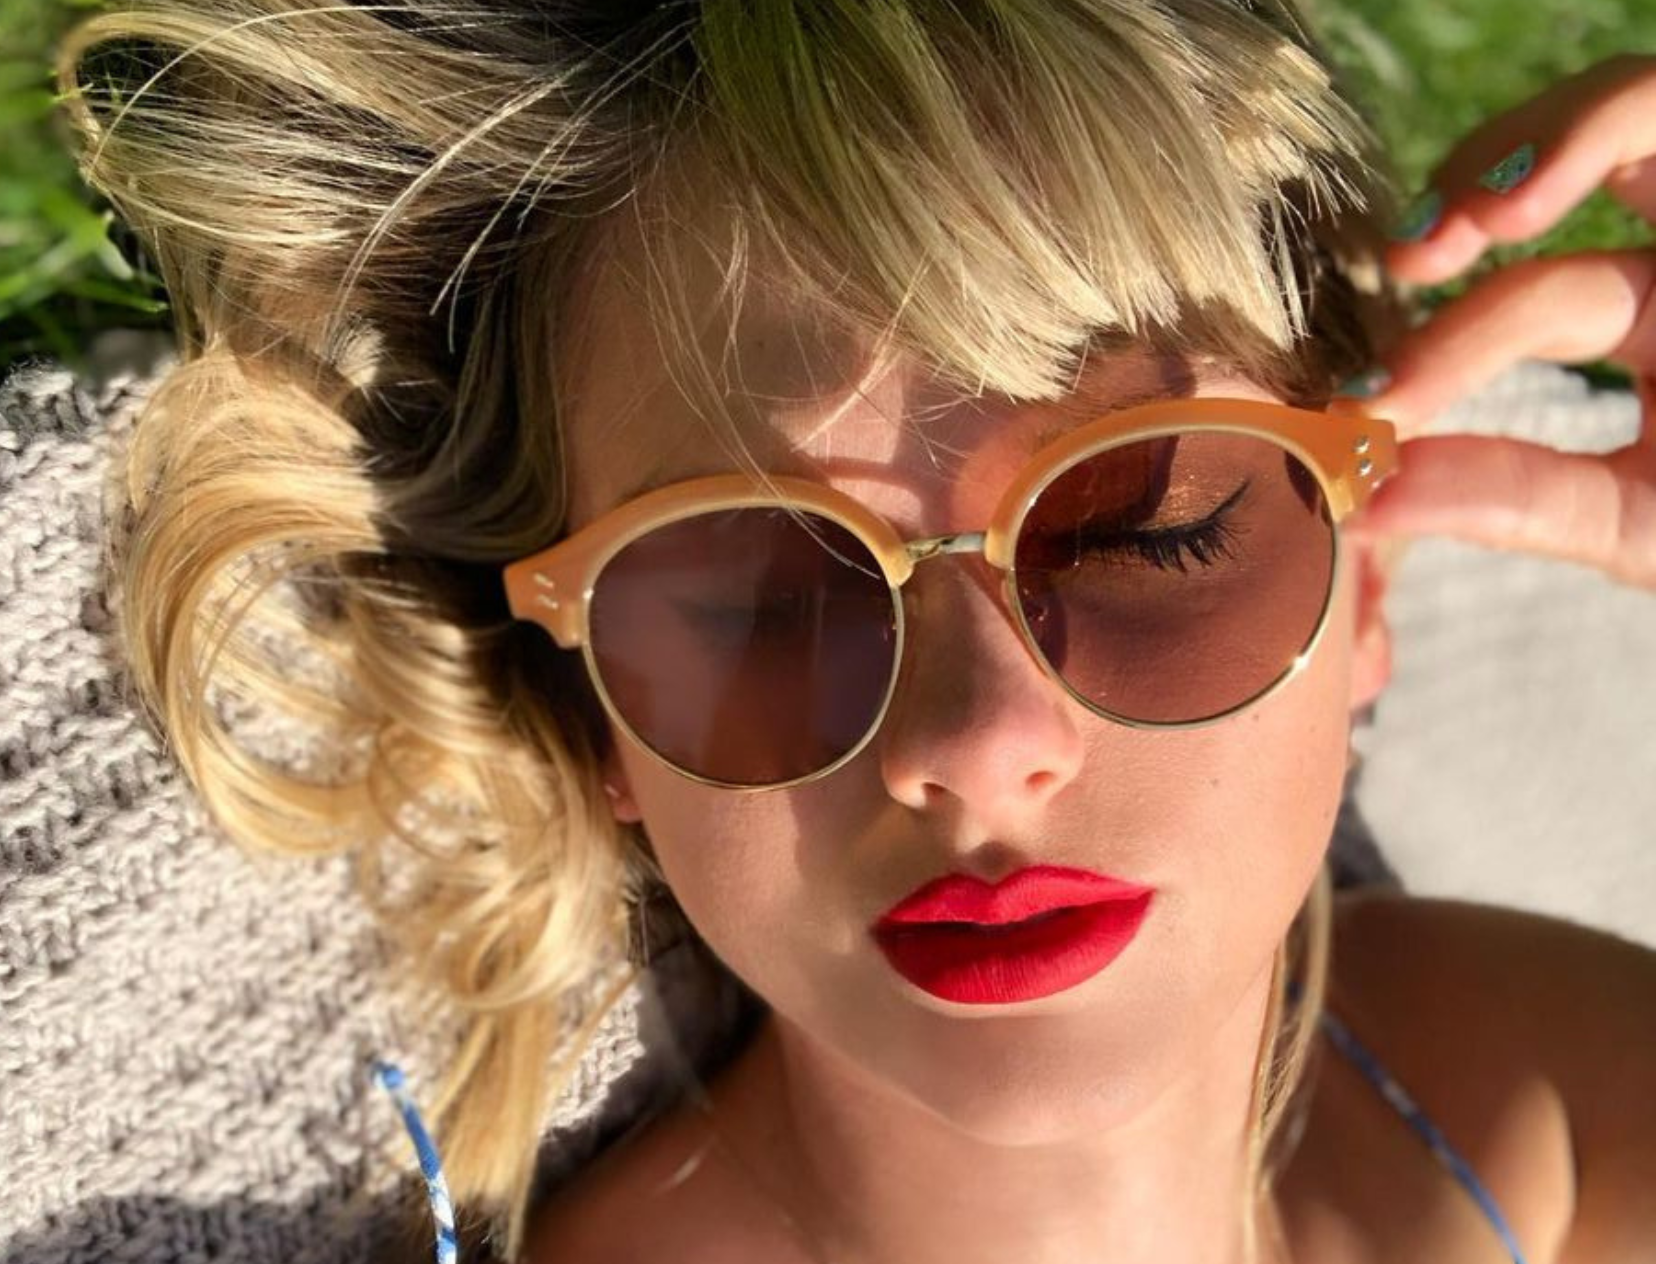 The Exact Lipsticks Taylor Swift Uses For Her Iconic Red Pout